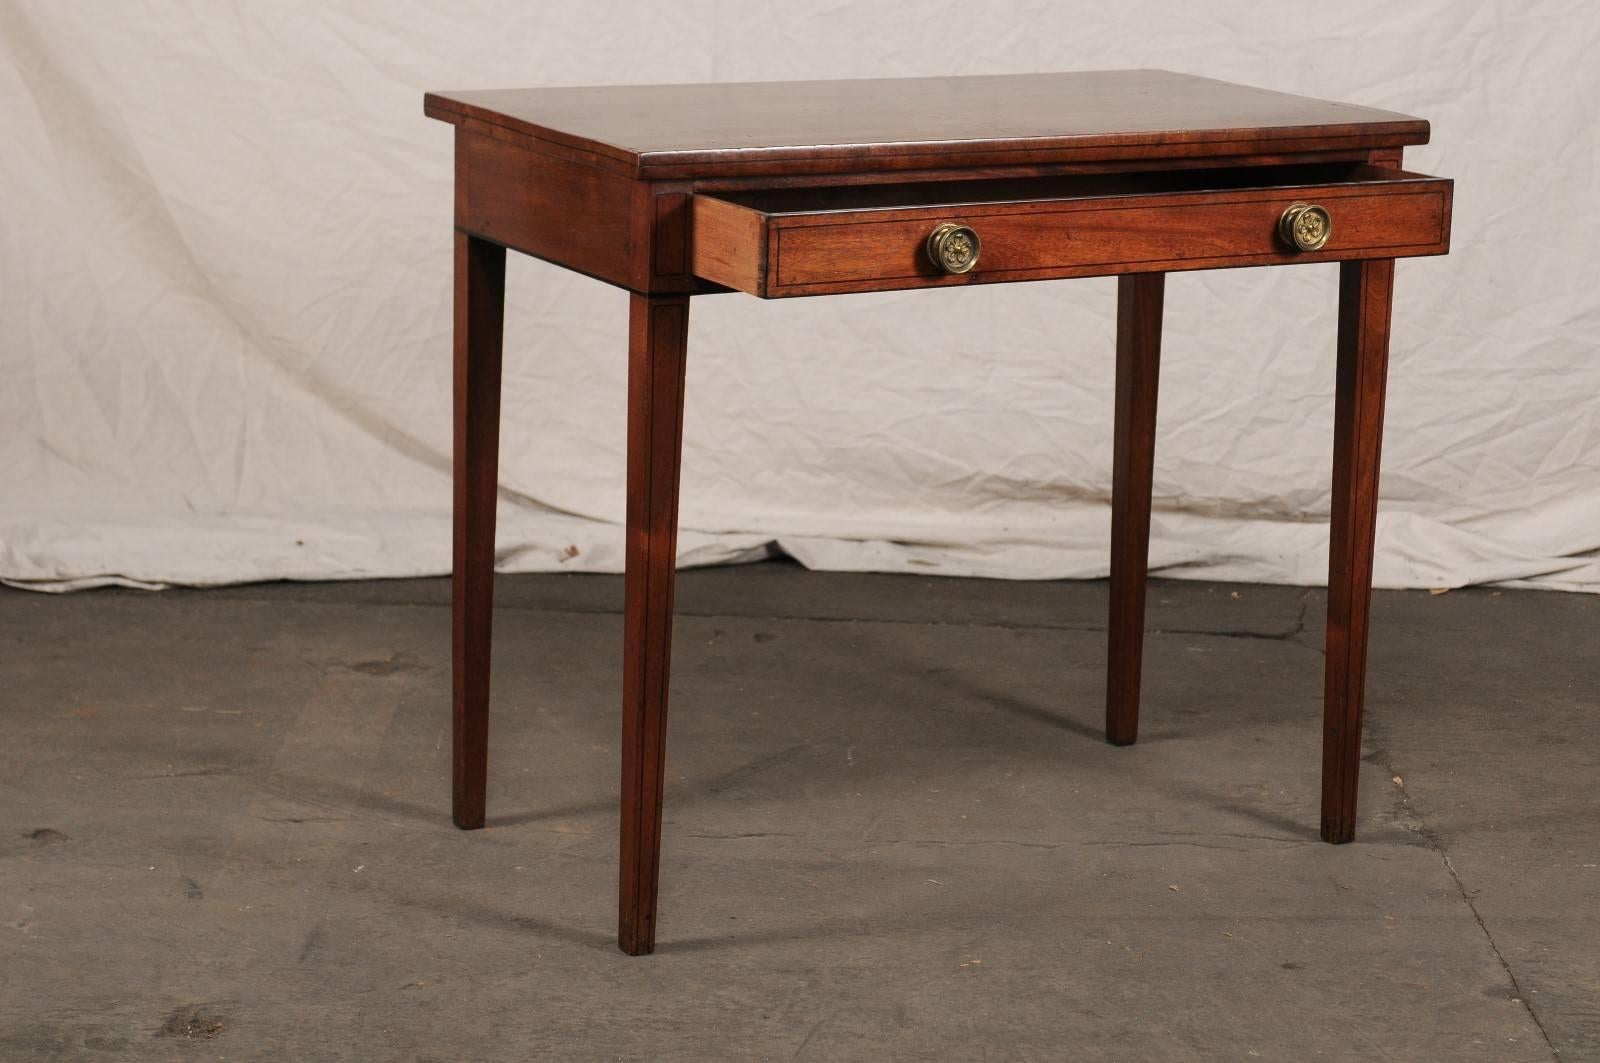 Early 19th Century English Regency Style Mahogany Table with Inlay, One Drawer 3